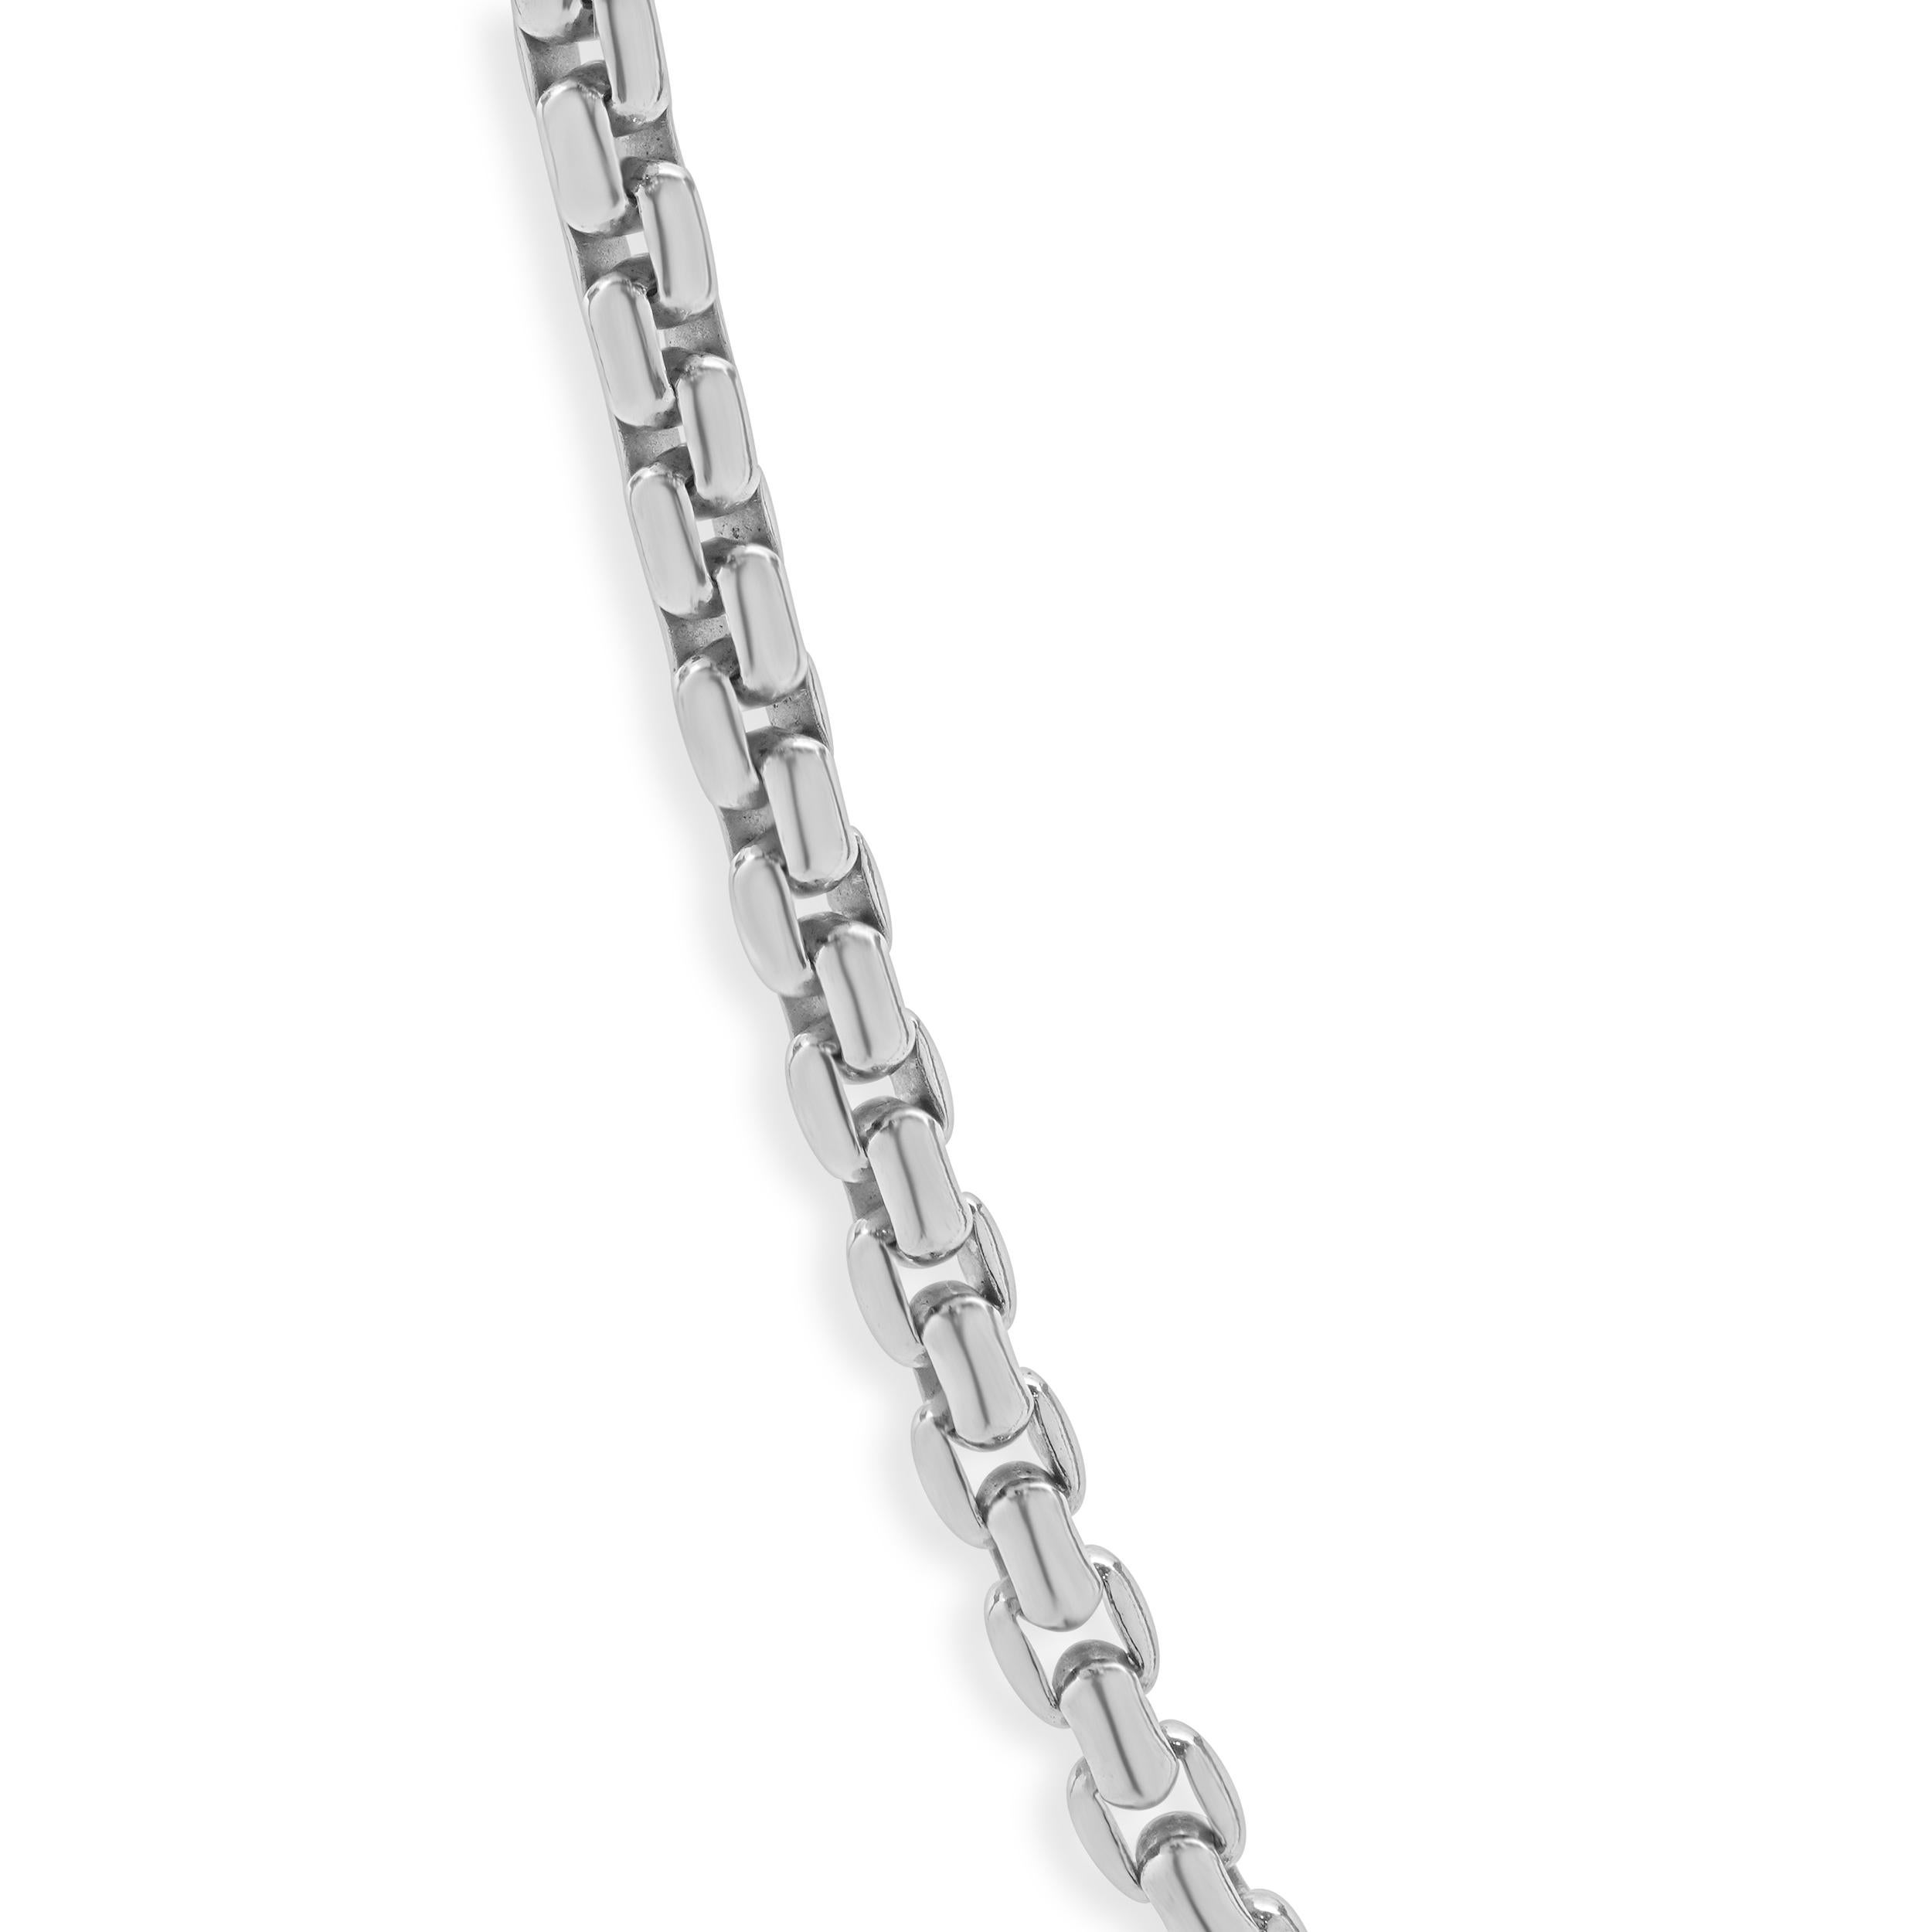 Tiffany & Co. 18 Karat White Gold 5MM Box Chain In Excellent Condition For Sale In Scottsdale, AZ